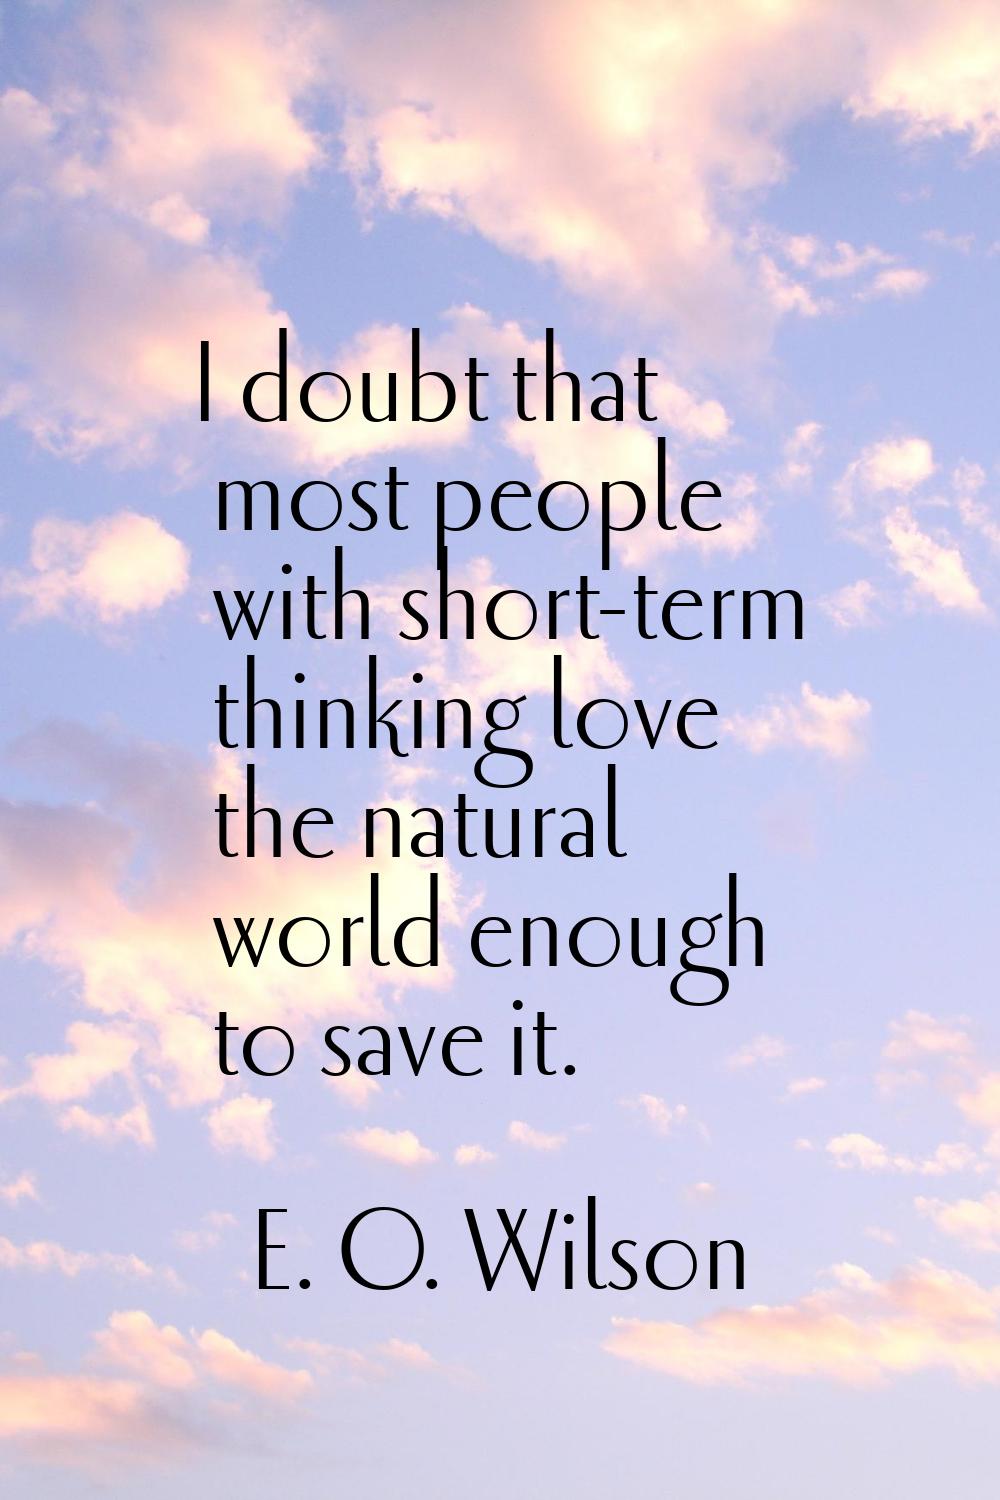 I doubt that most people with short-term thinking love the natural world enough to save it.